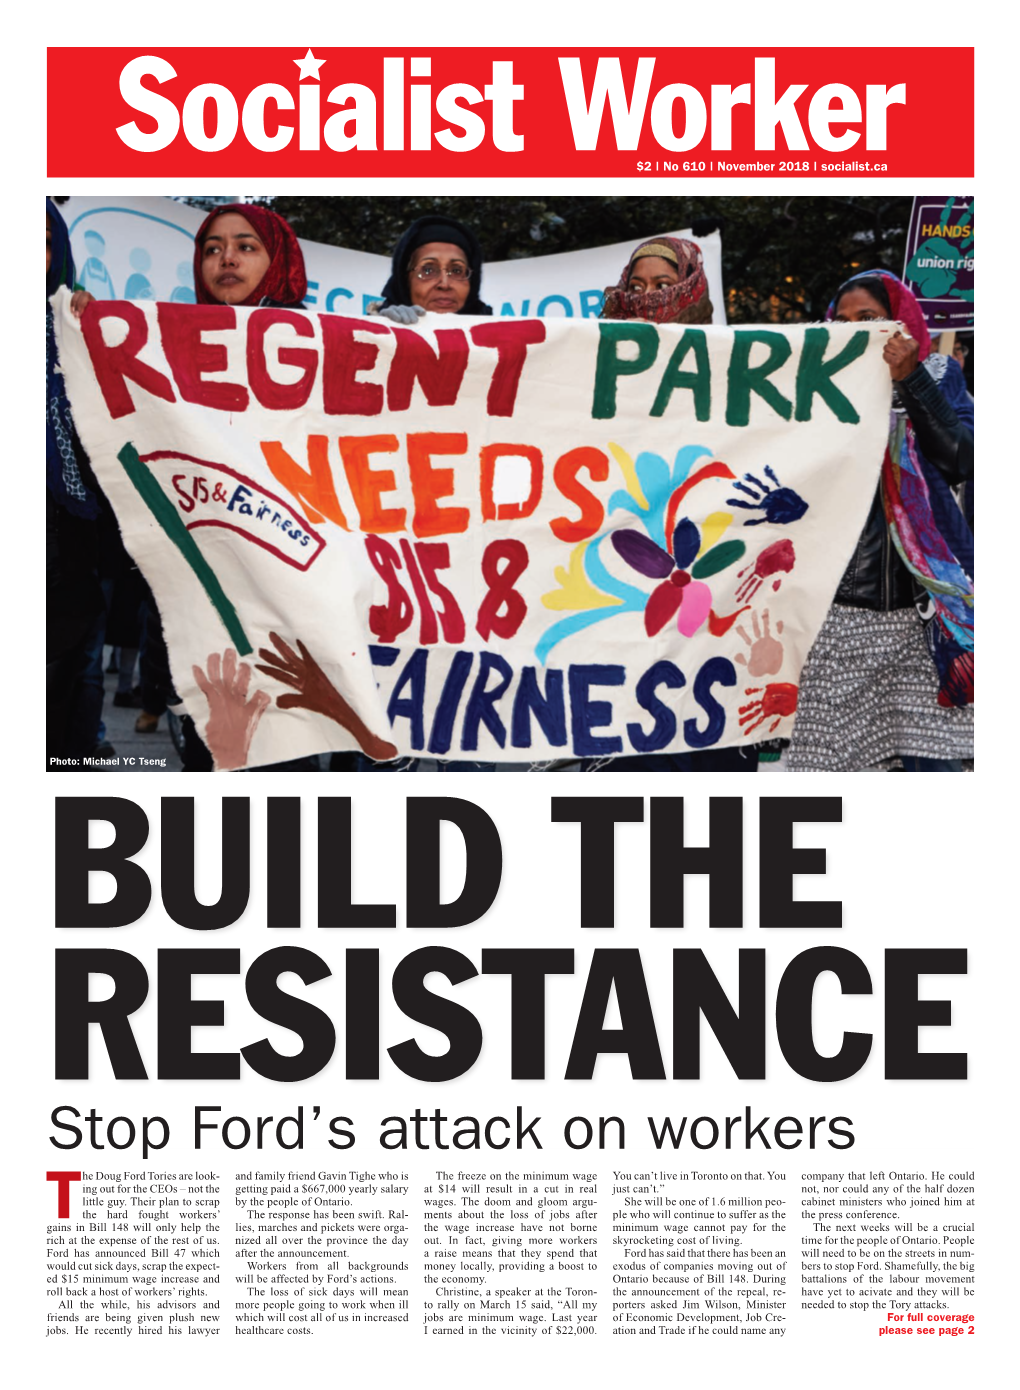 Stop Ford's Attack on Workers